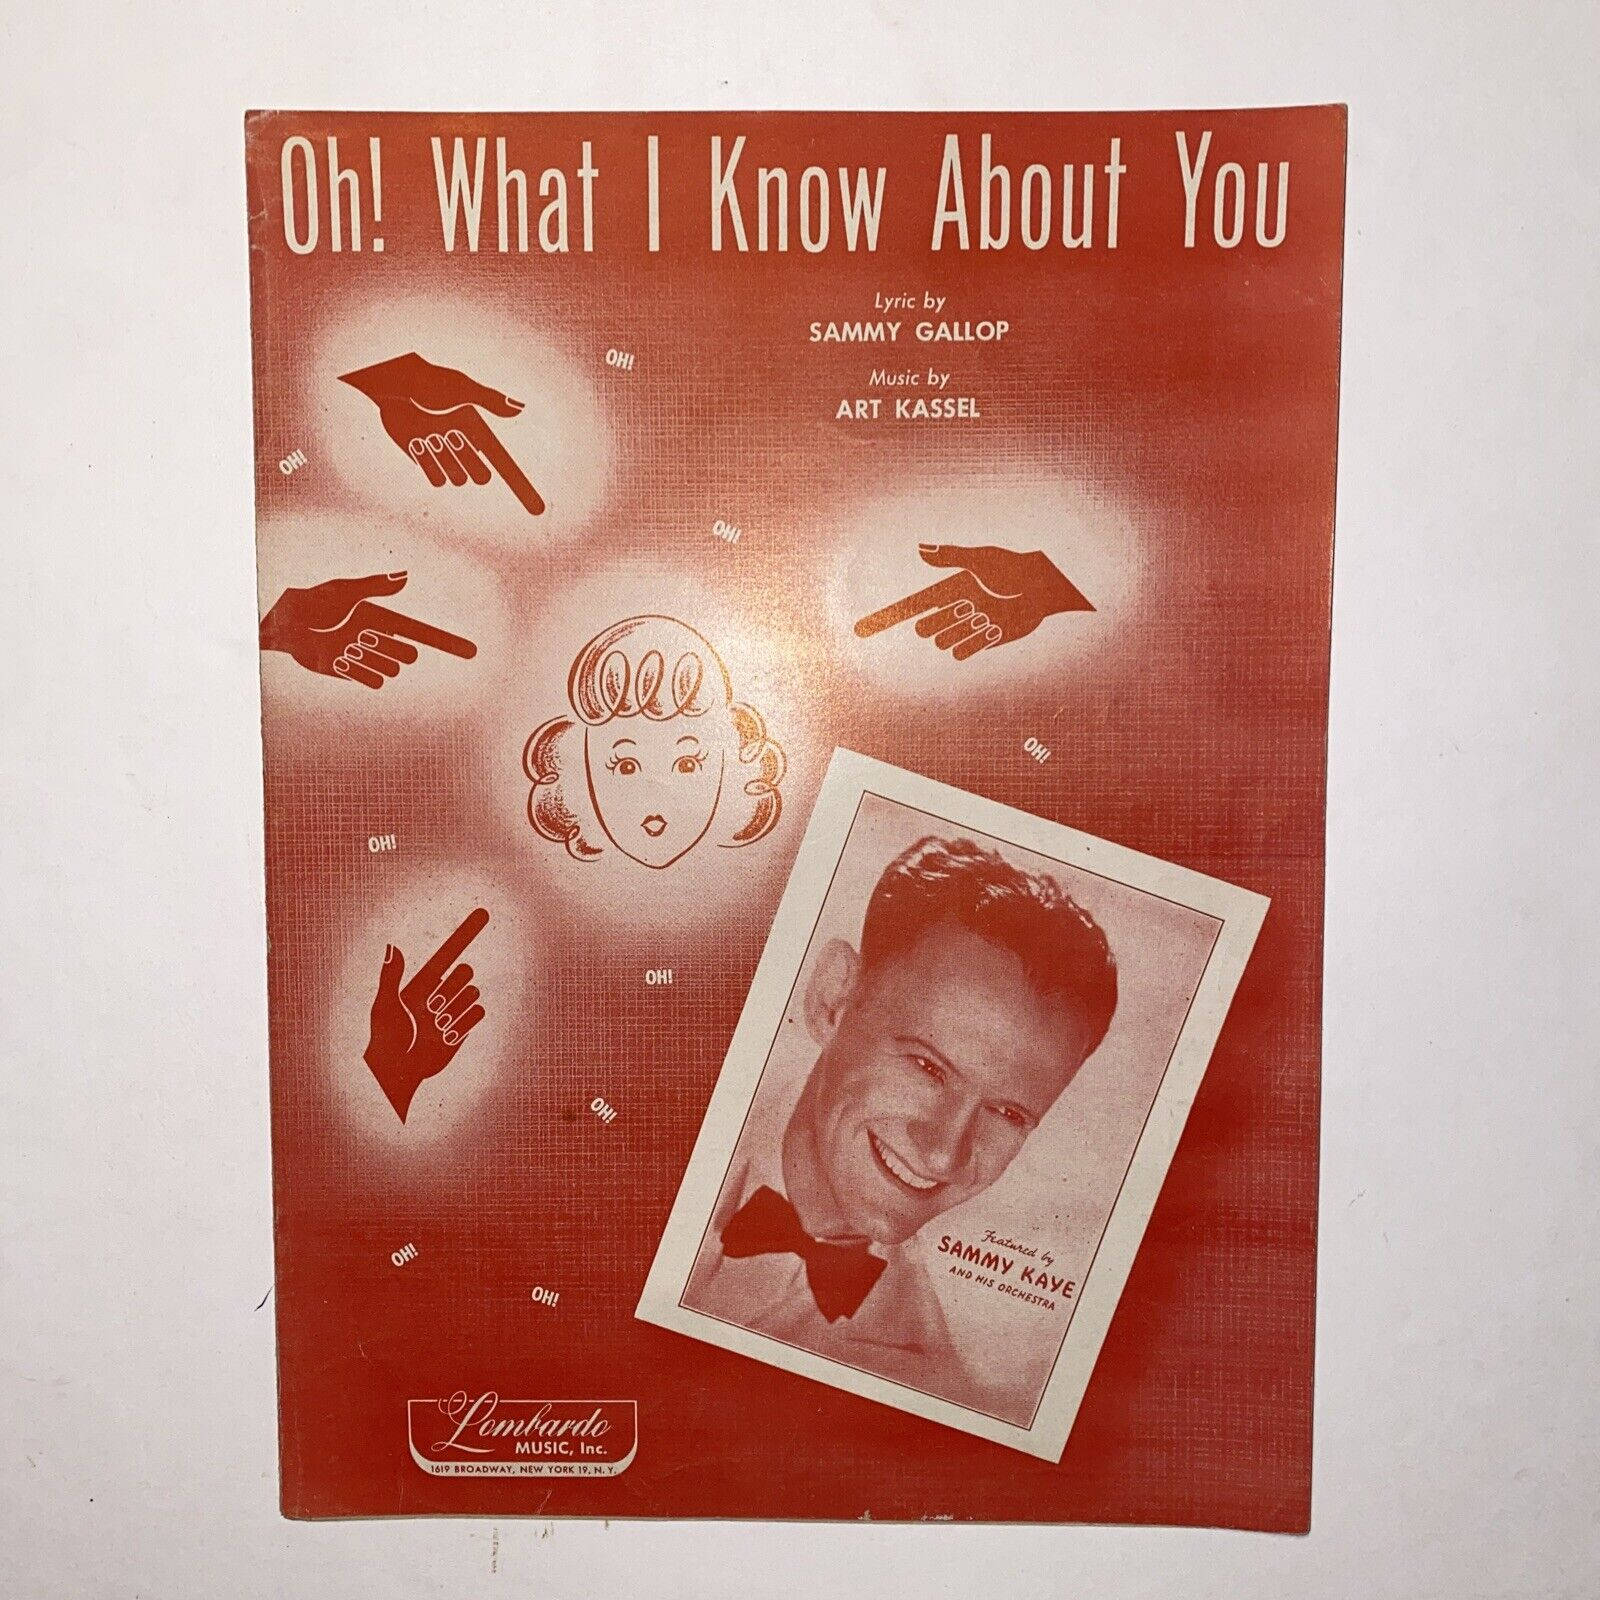 Sammy Kaye Album Cover - "Oh, What I Know About You!" Wallpaper